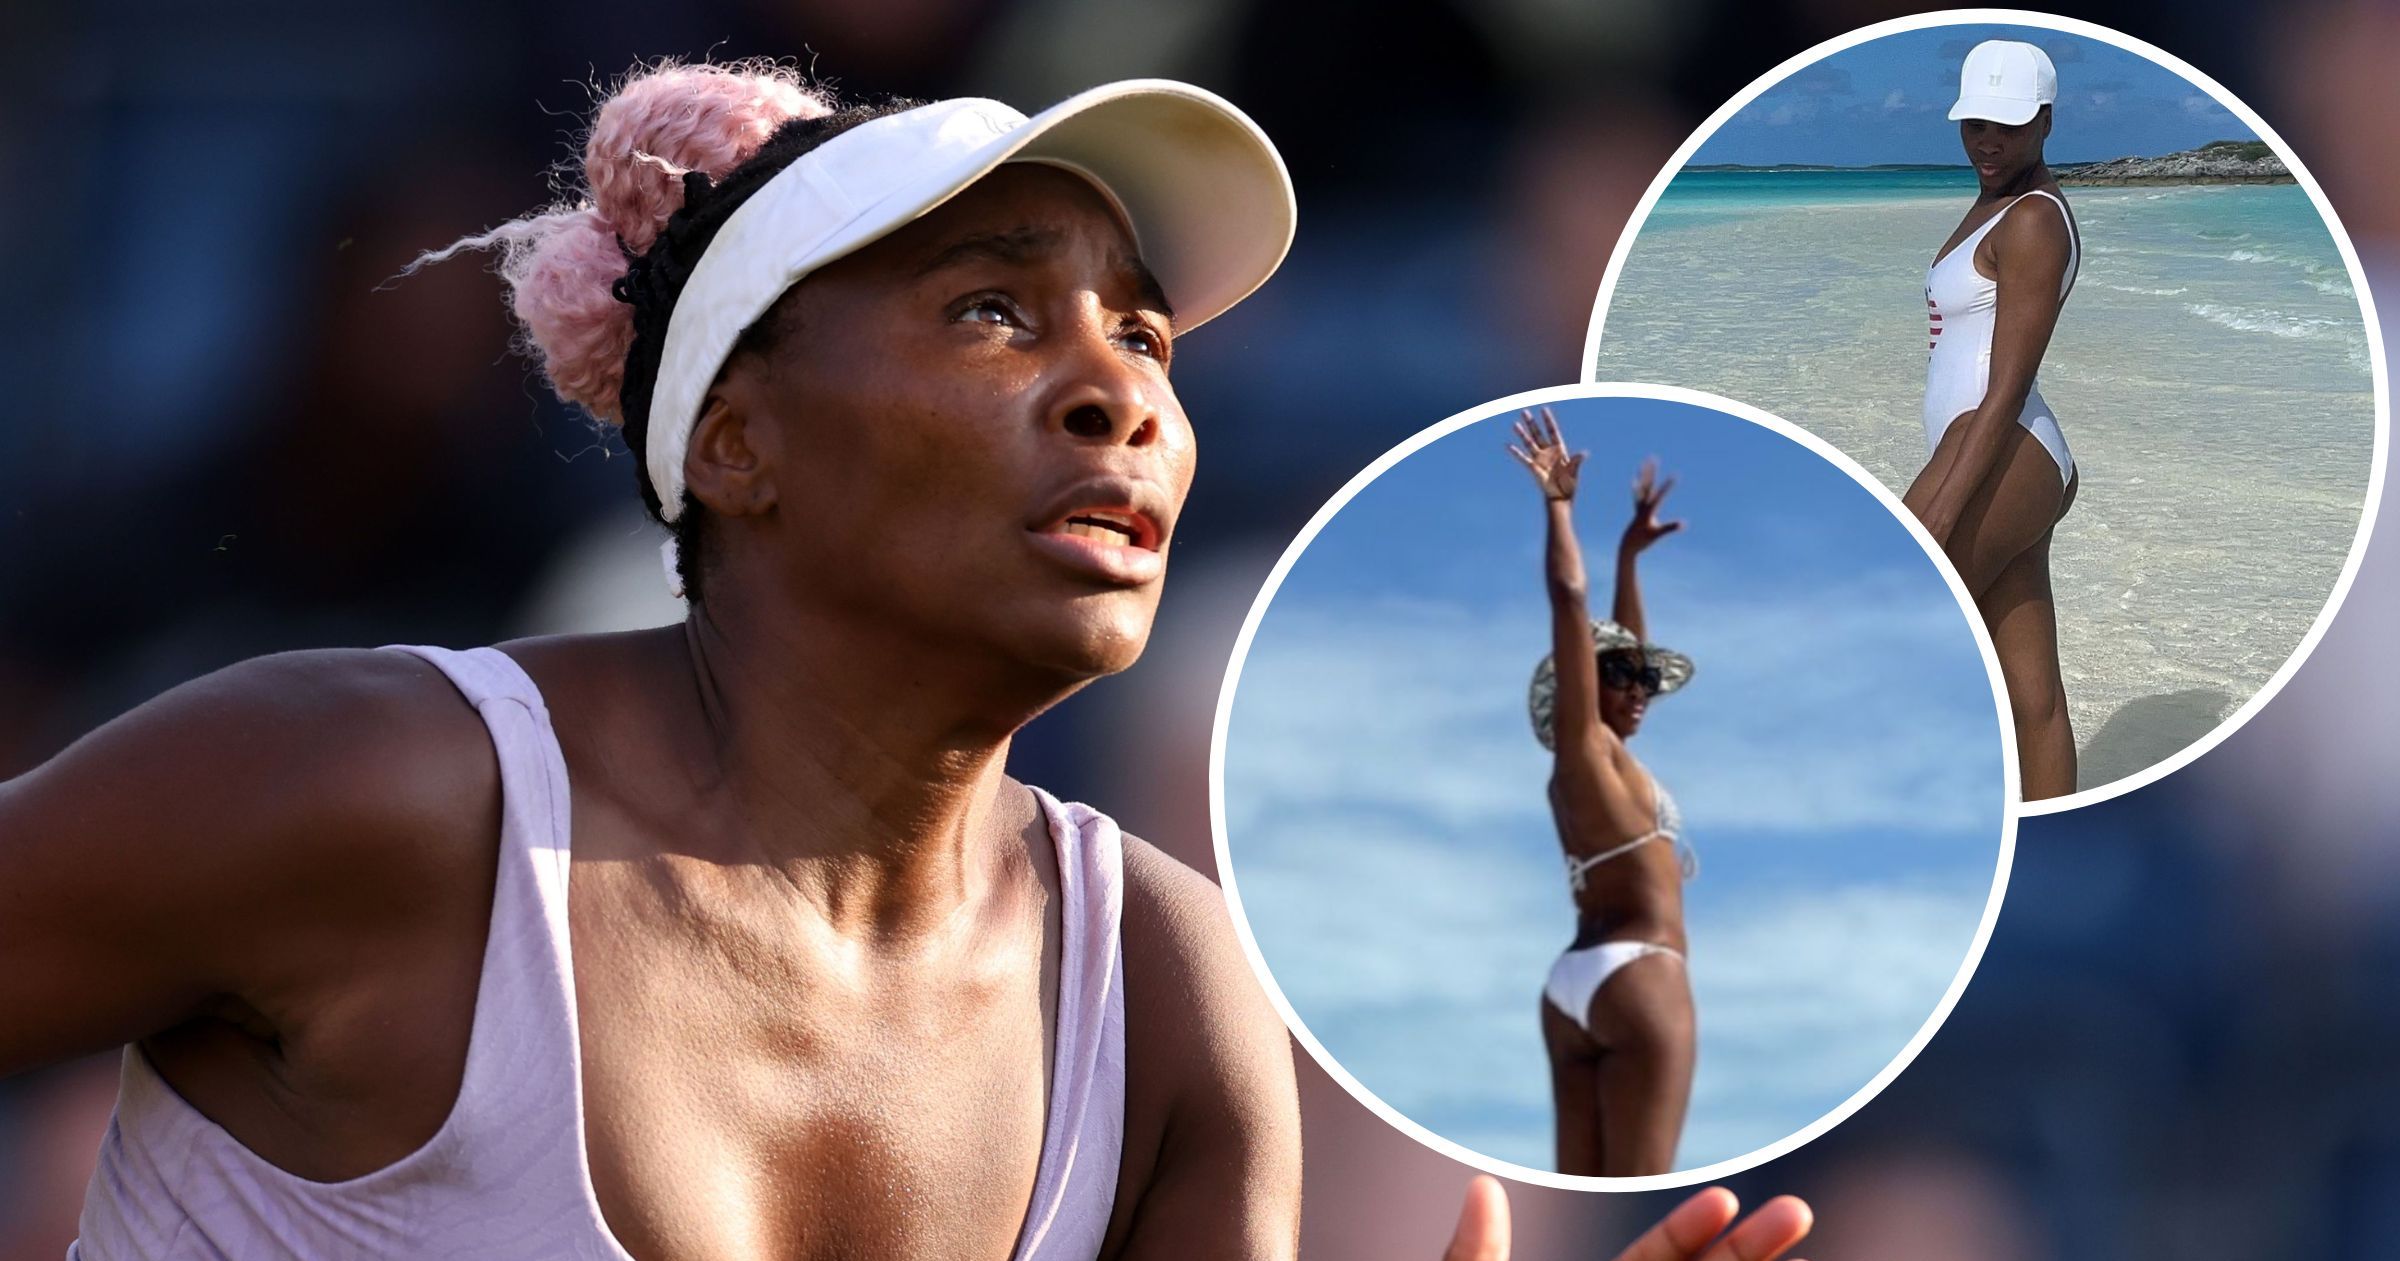 chris meidl recommends sexy pictures of venus williams pic